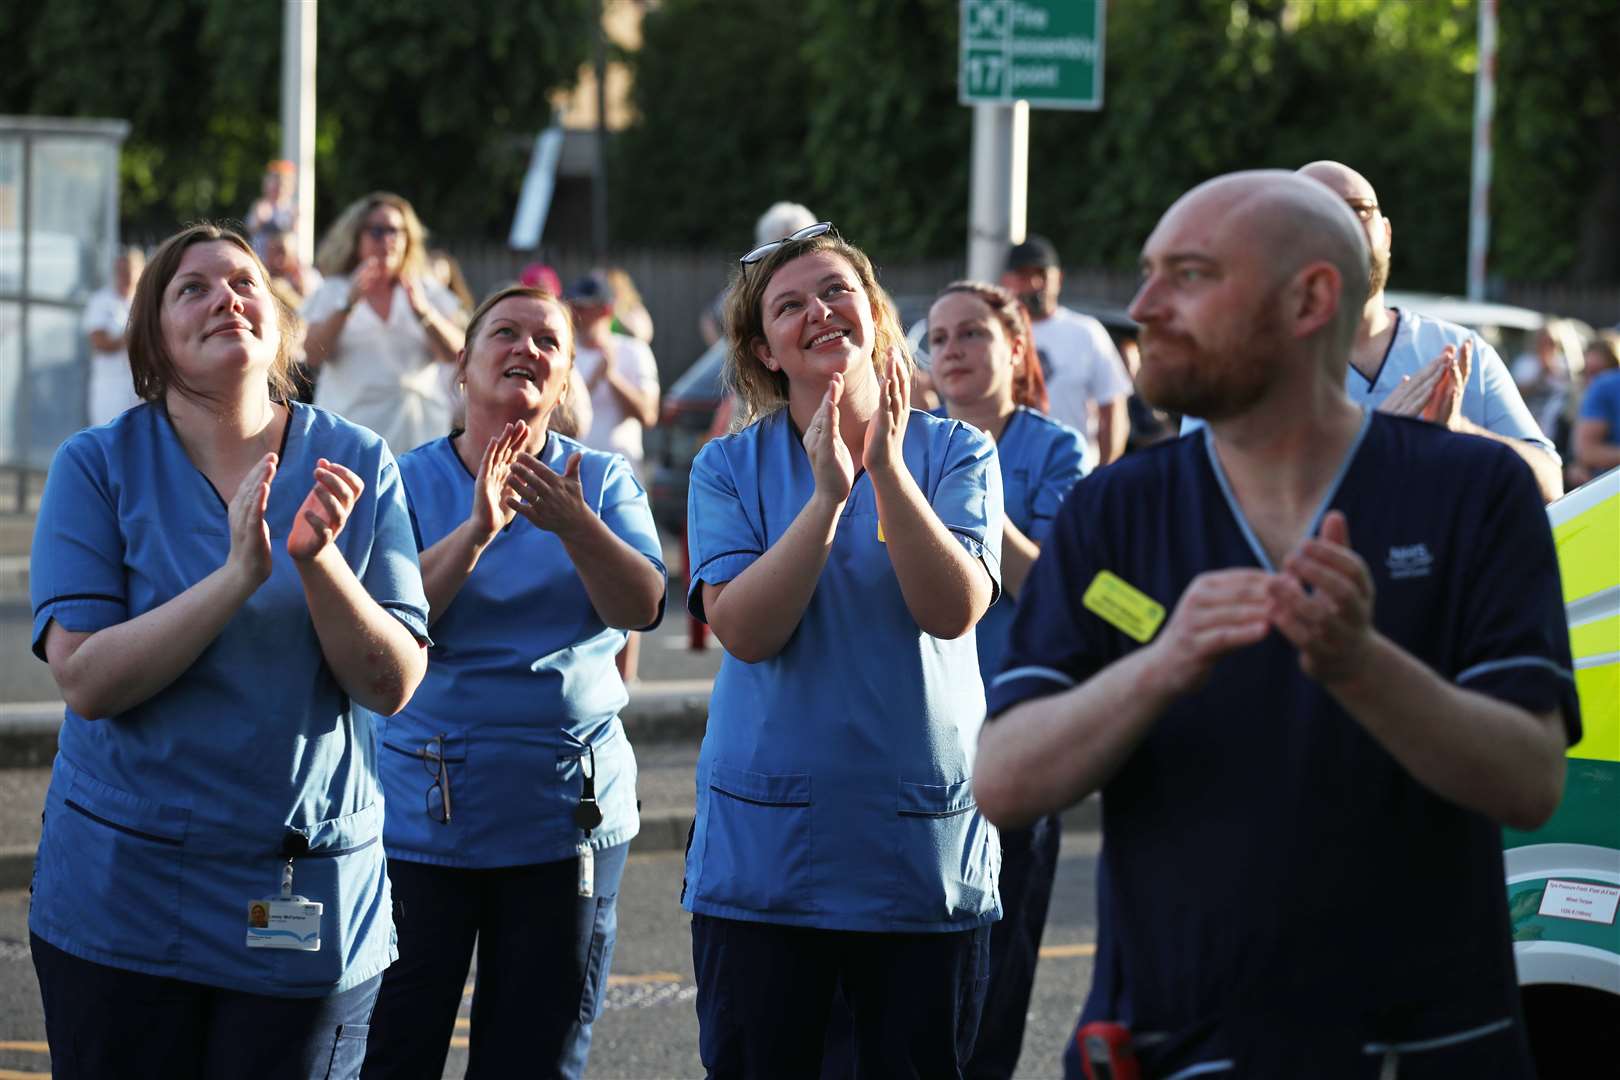 Staff from Queen Elizabeth University Hospital in Glasgow join the Clap for Carers (Andrew Milligan/PA)